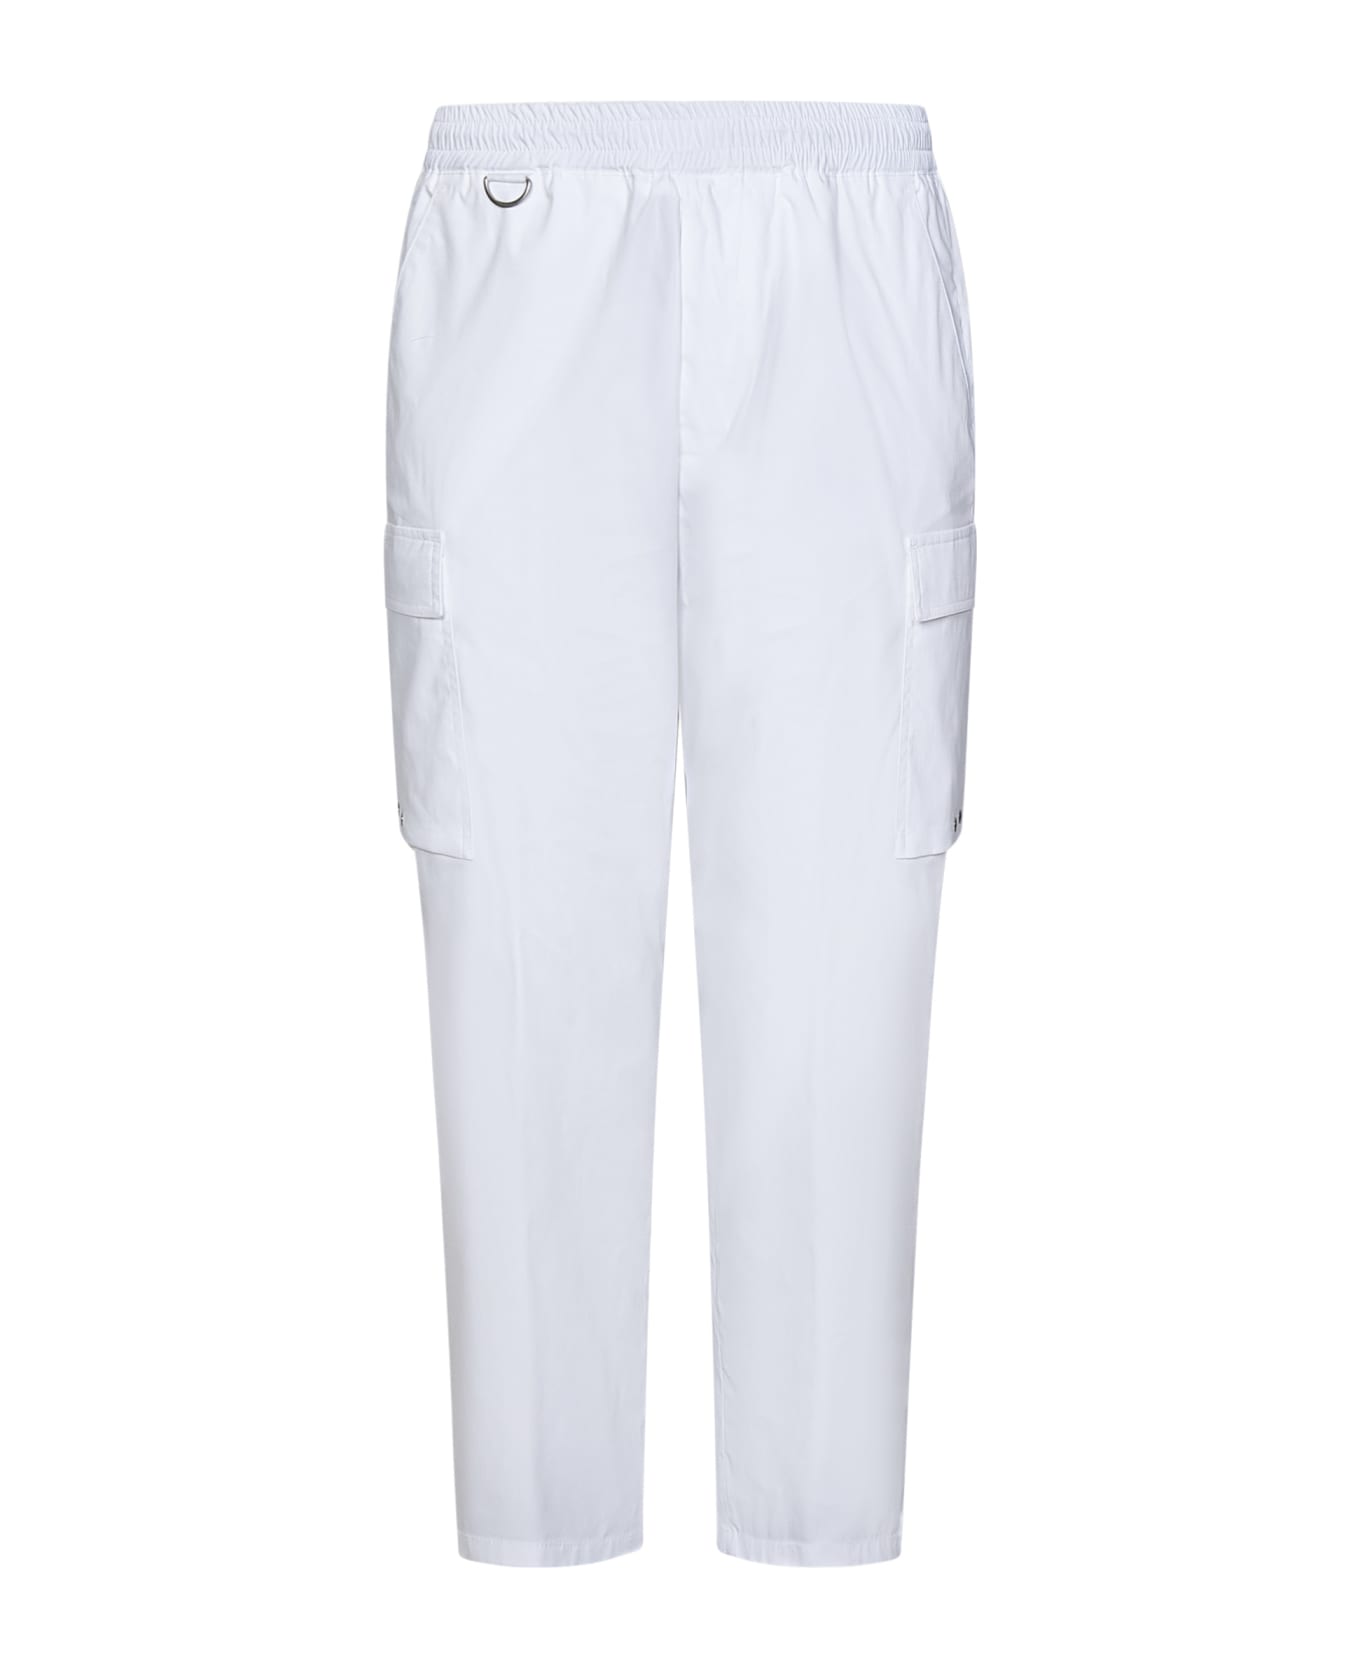 Low Brand Trousers - White ボトムス